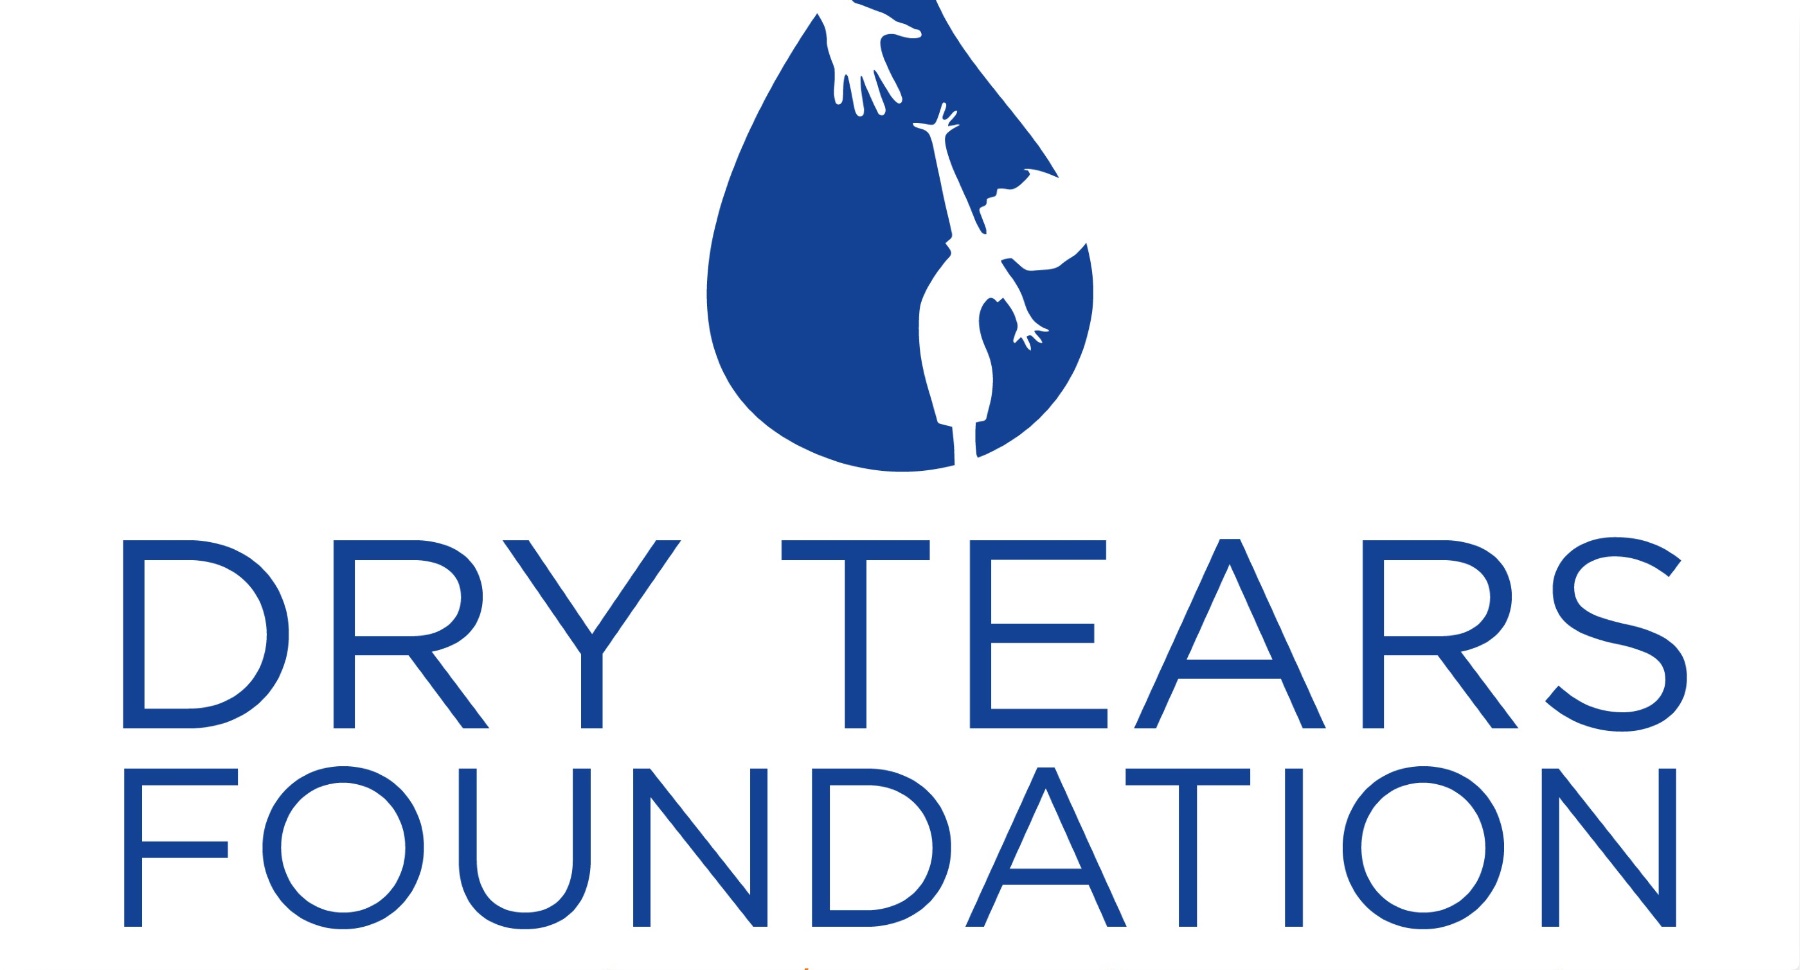 Dry Tears Foundation undertakes Smile For Christmas Project